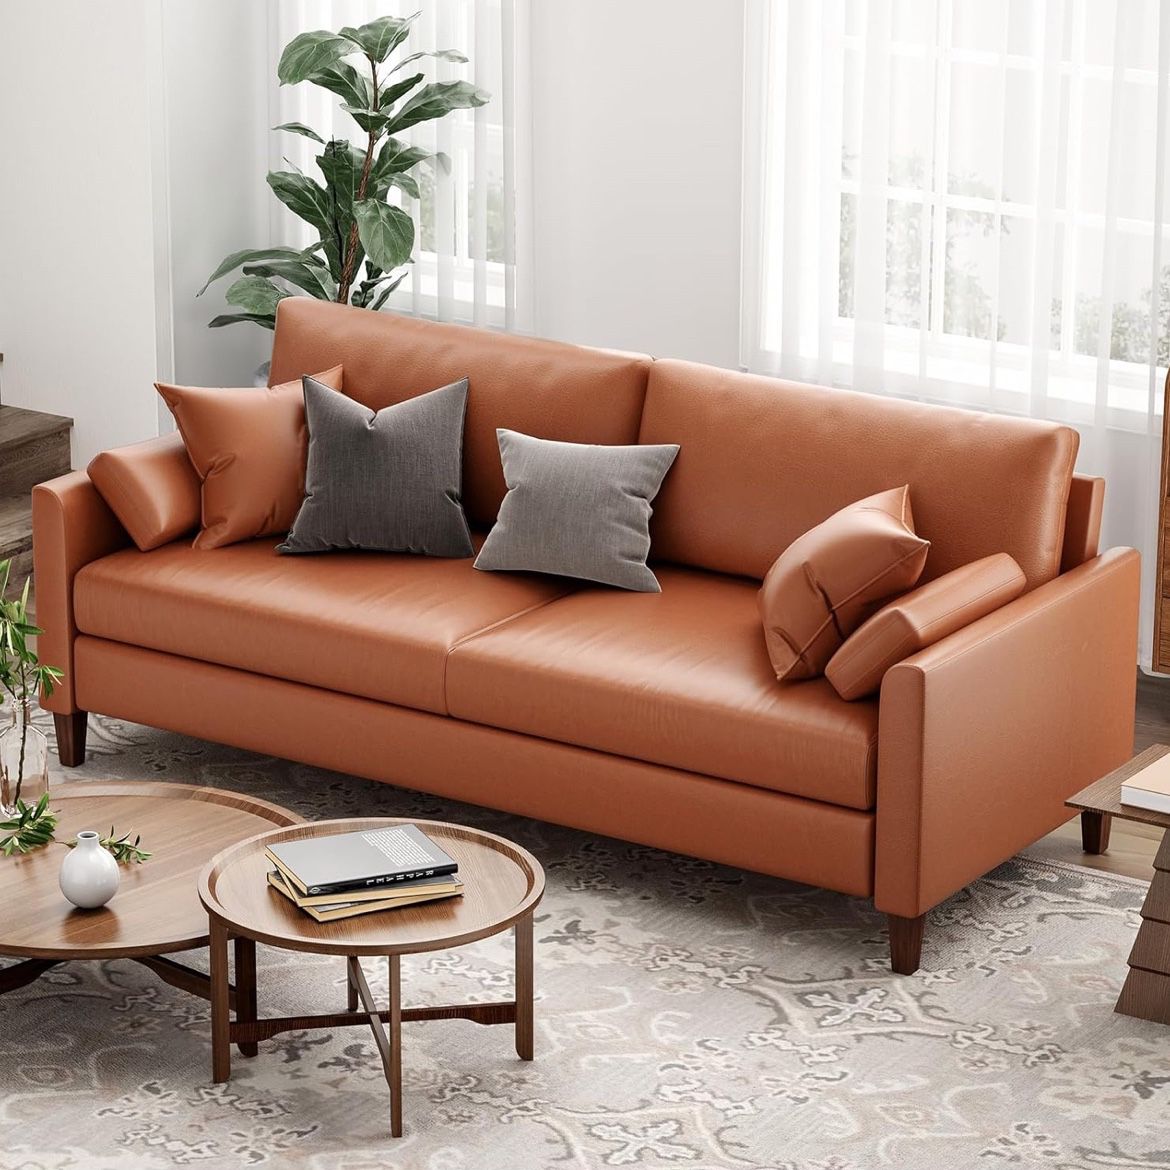 78 Inch Faux Leather Sofa with Padded Cushions for Living Room